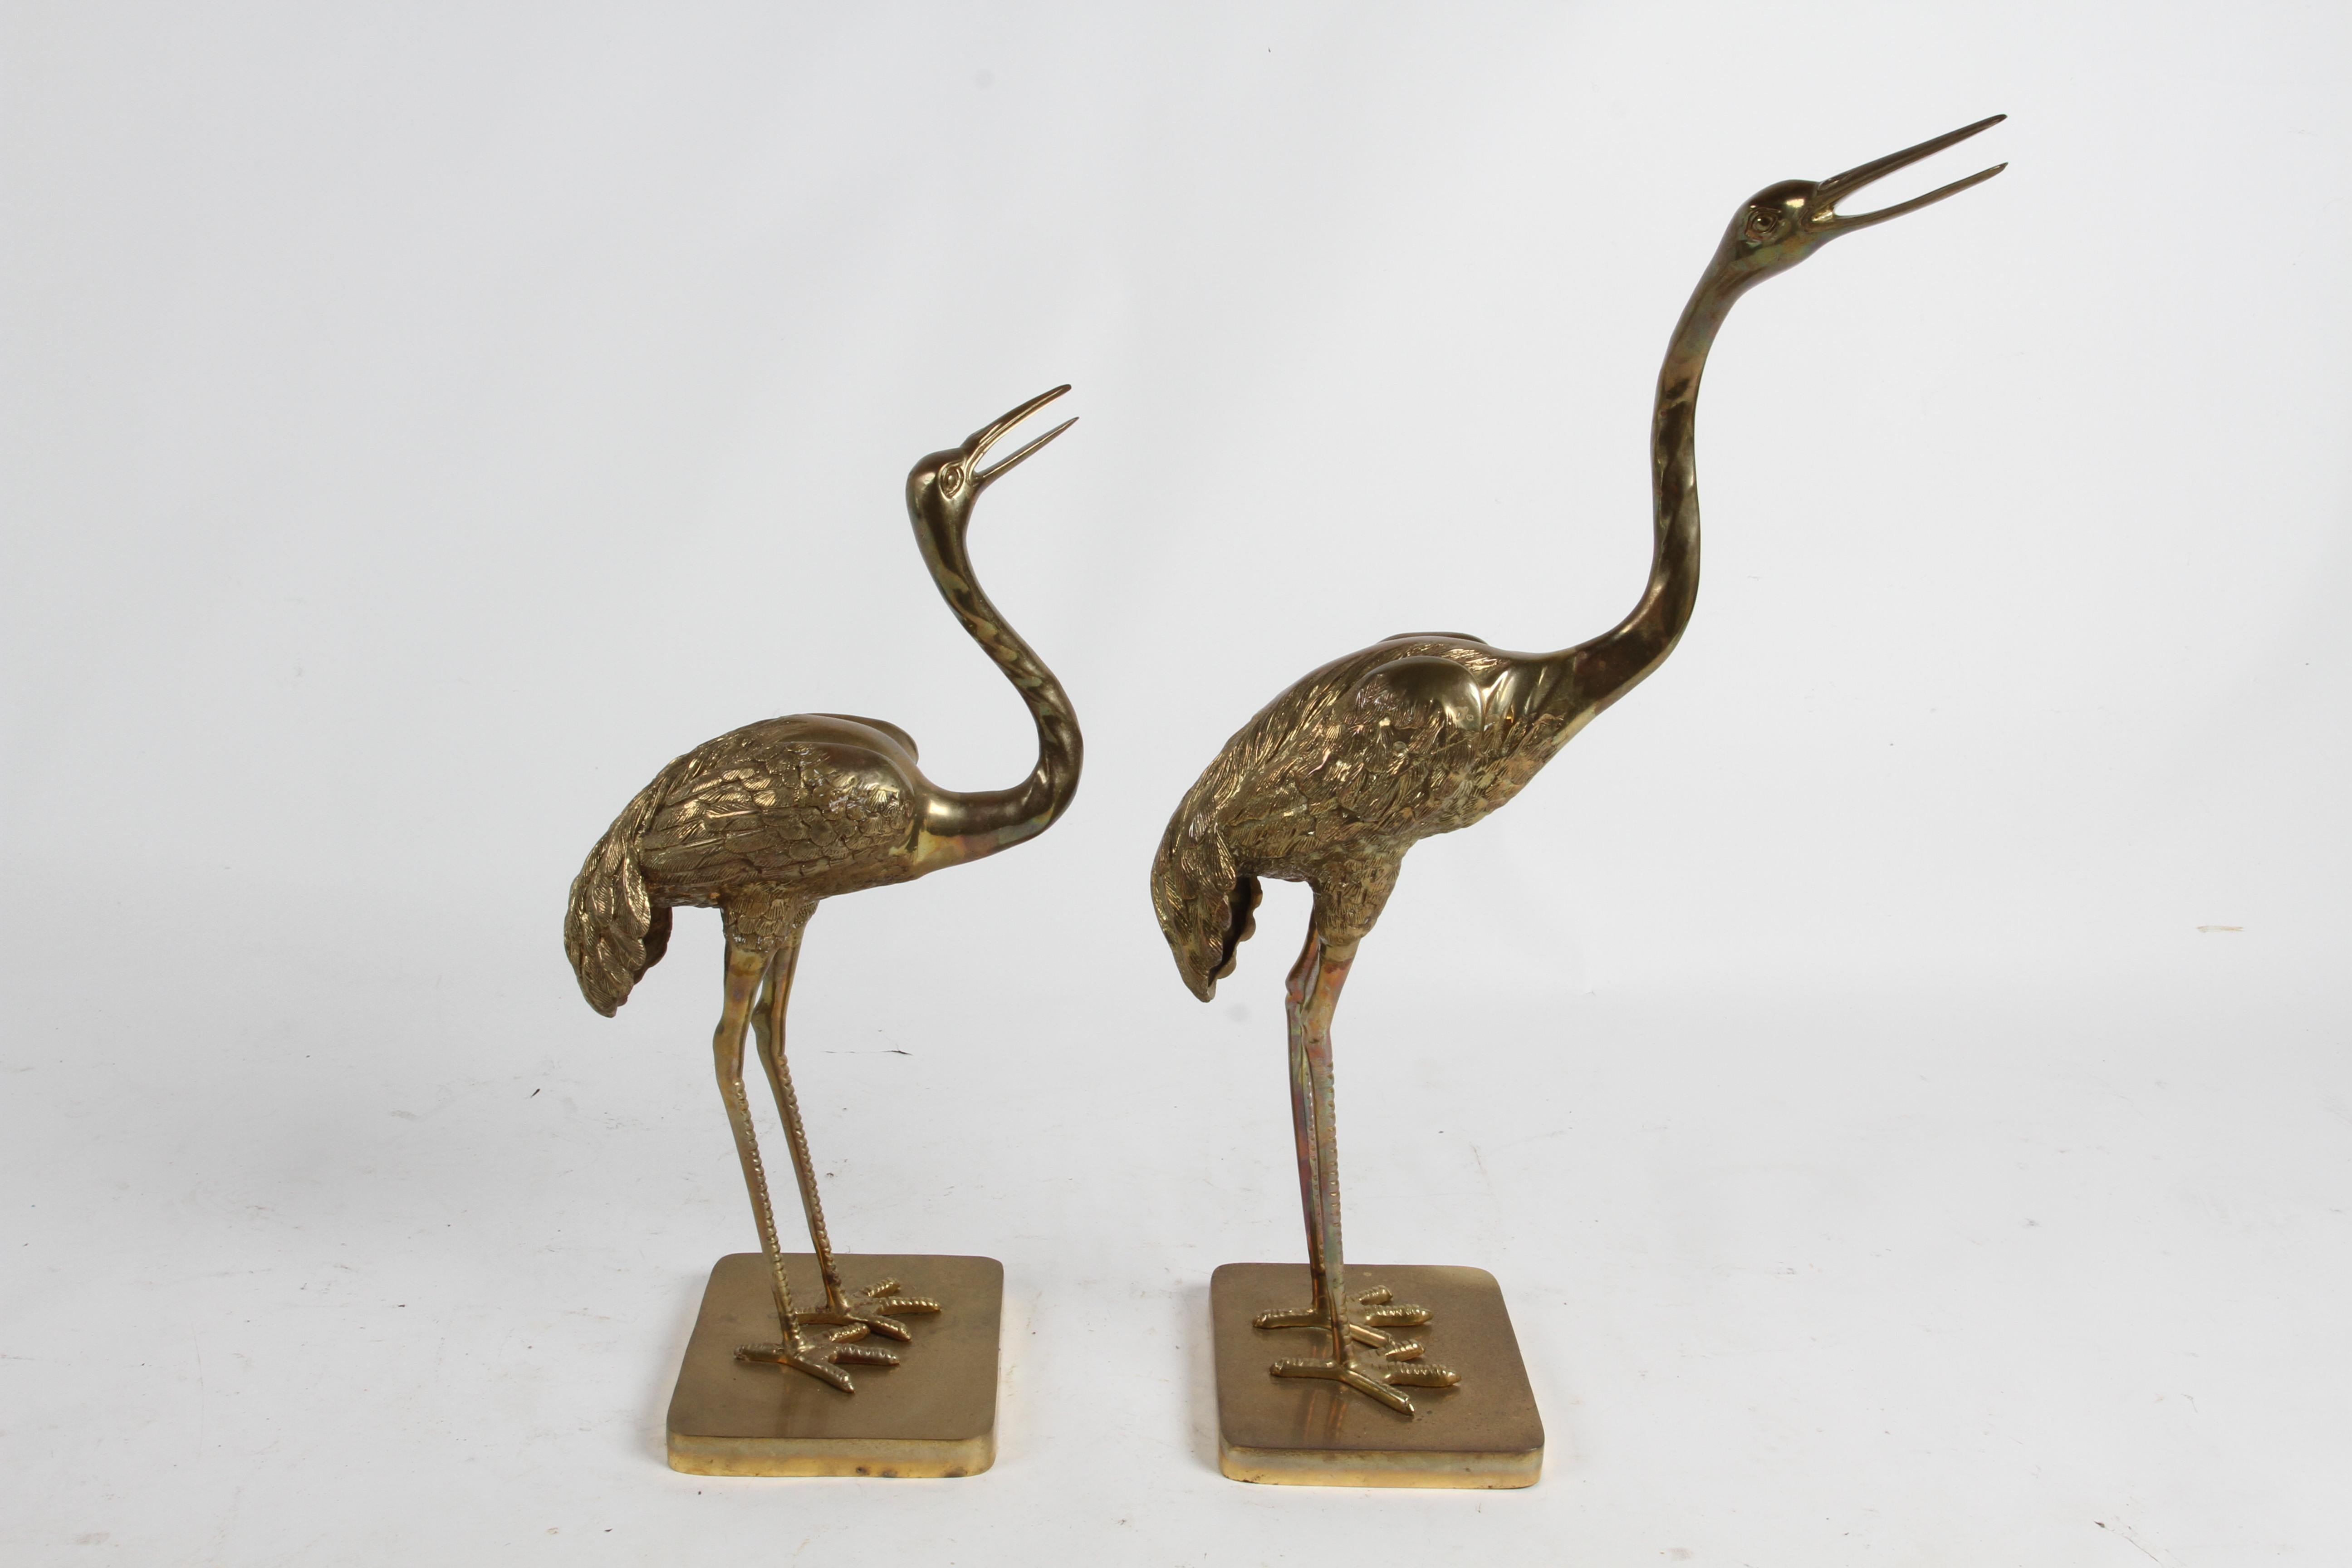 Pair of Hollywood Regency Circa 1970s Large Brass Cranes or Herons Sculptures For Sale 4